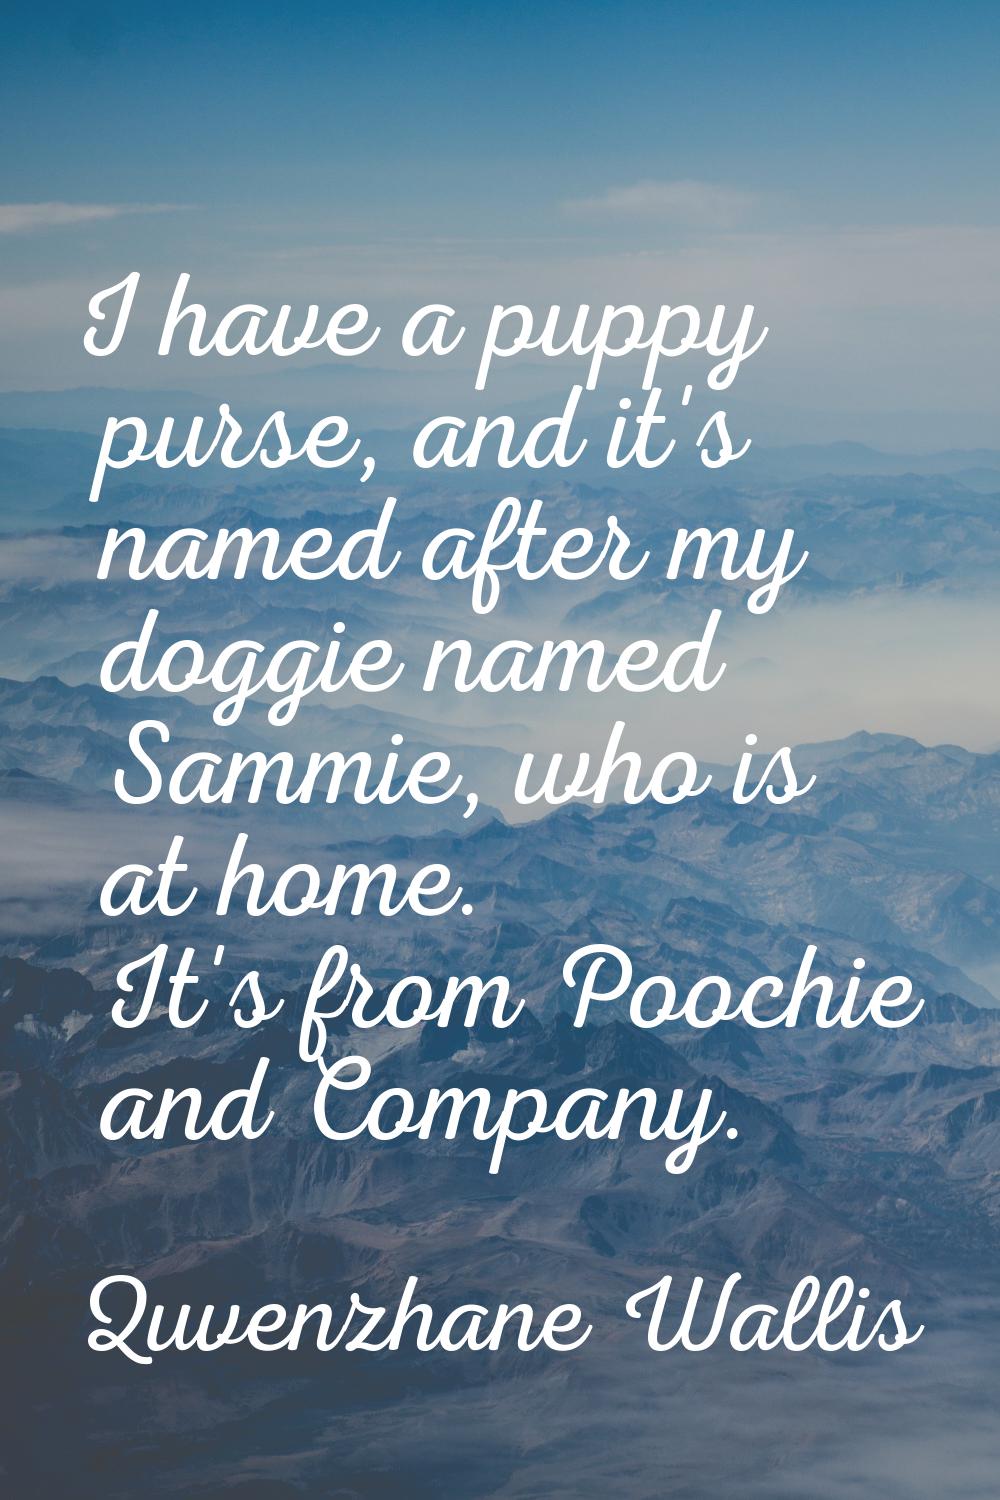 I have a puppy purse, and it's named after my doggie named Sammie, who is at home. It's from Poochi